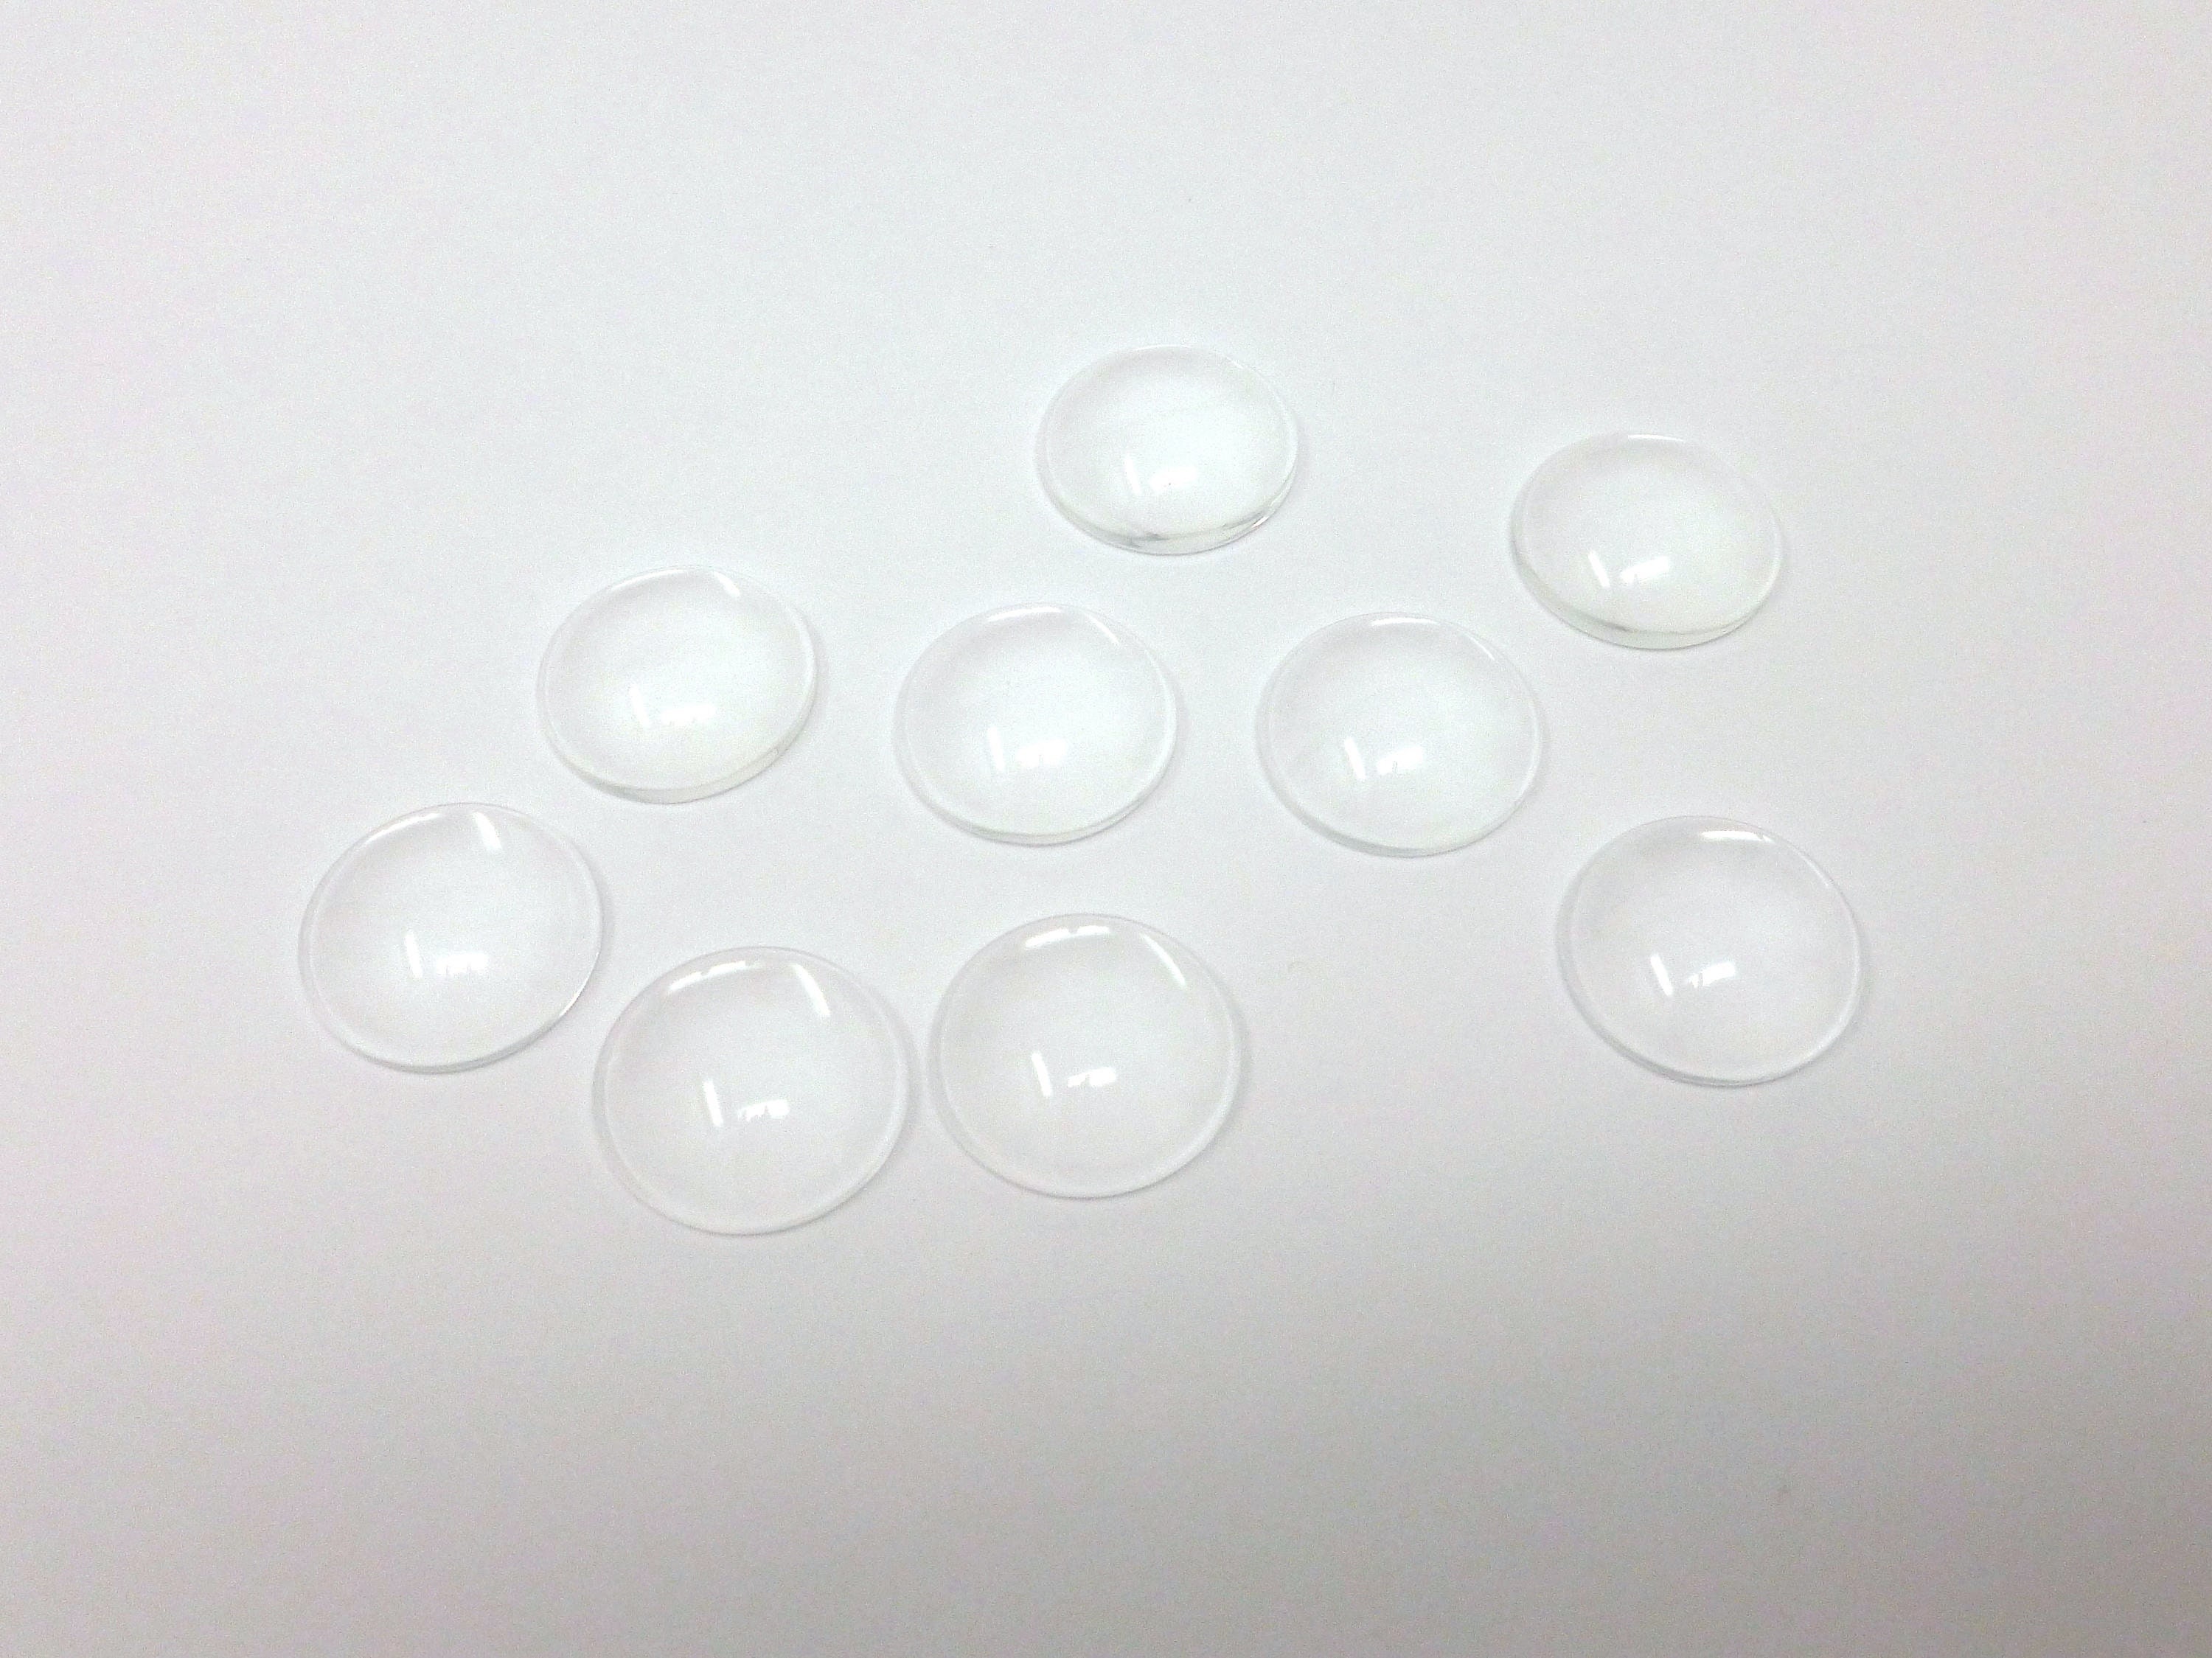 20mm Round Clear Acrylic Cabochons - 25 Pieces